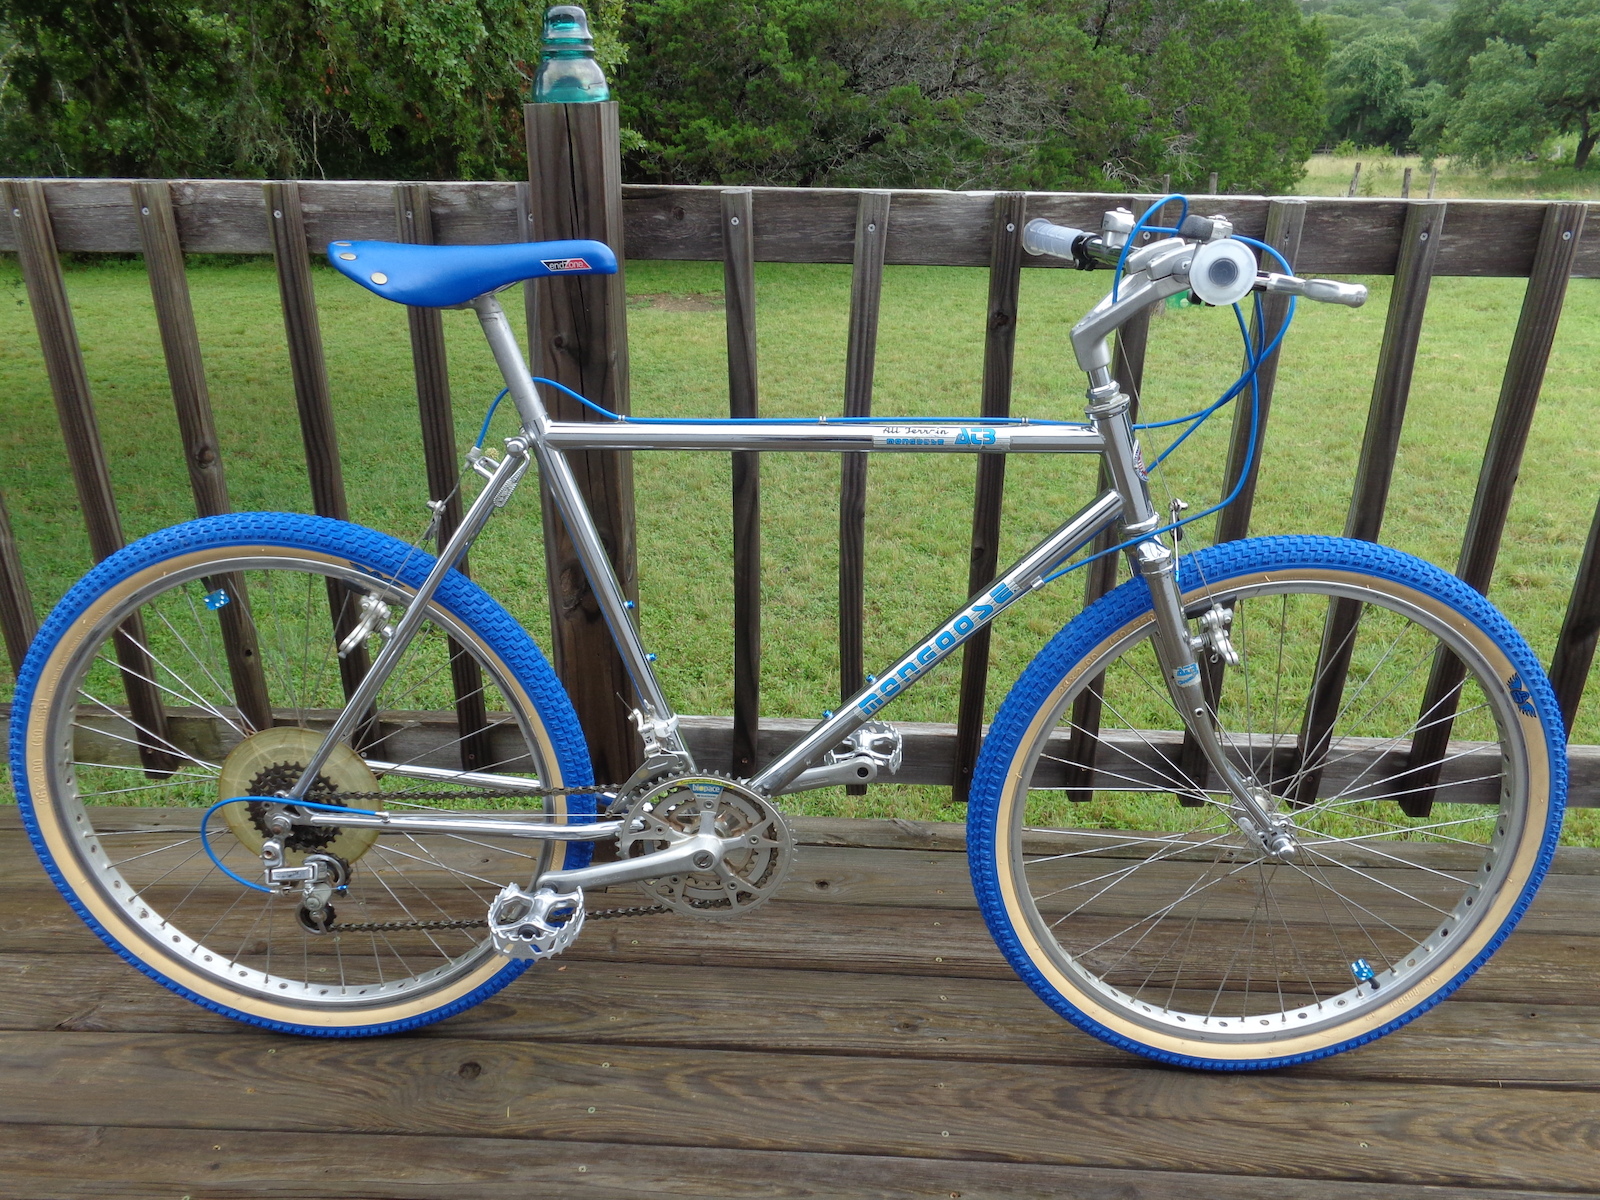 Rainy day today, doin' some updates to my 80's bikes...New grips, saddle, pedals, tires & bottle cage screws